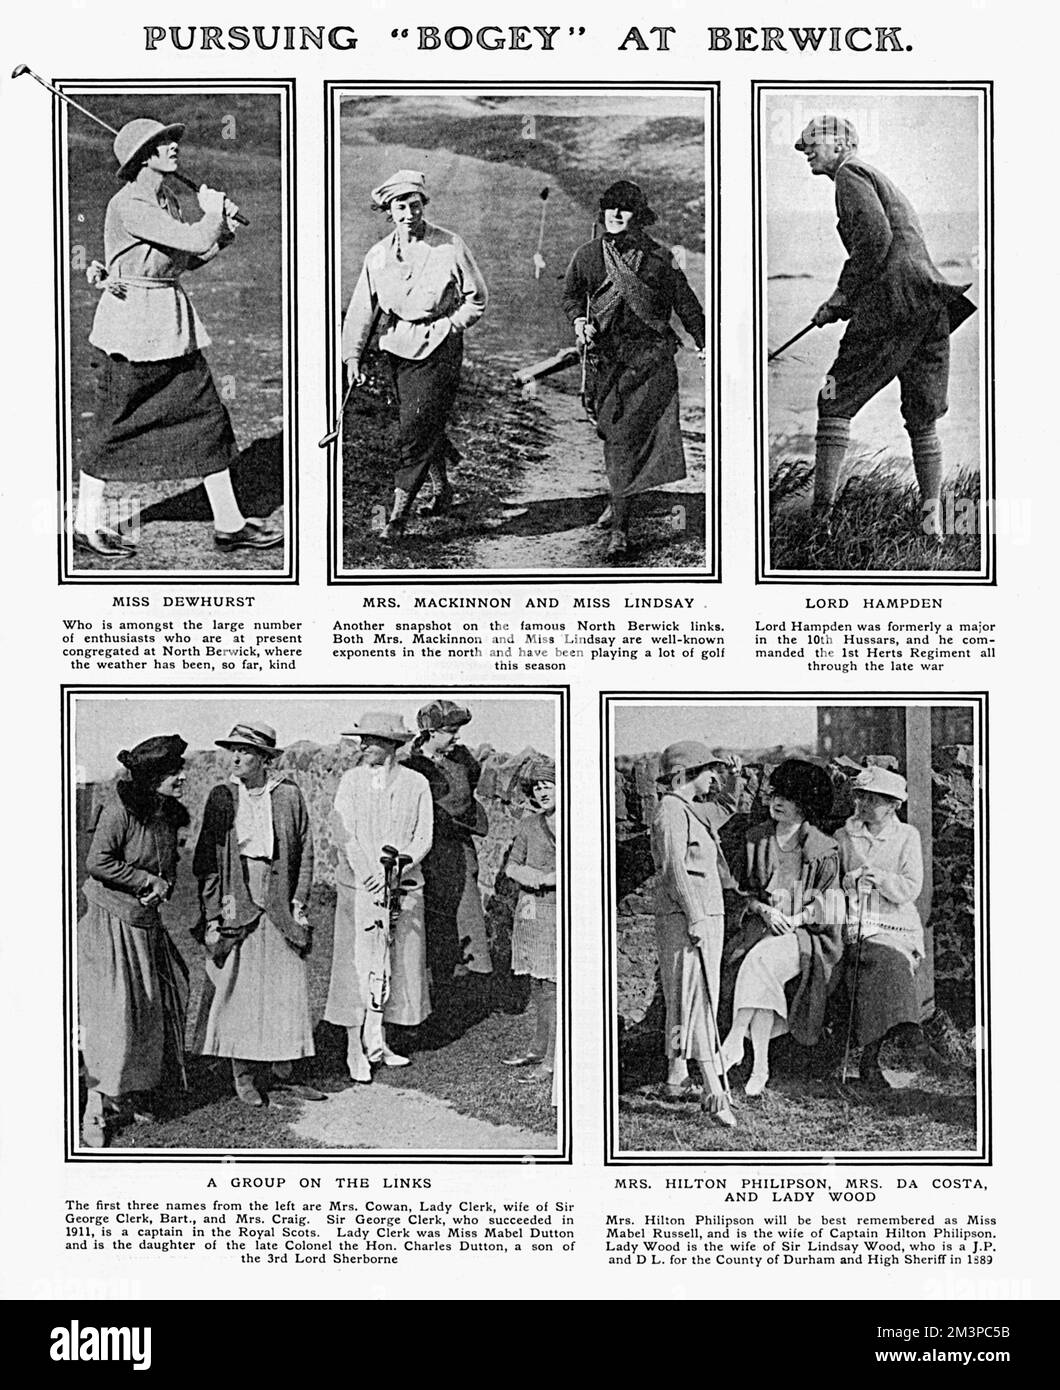 Golfers at the &quot;Redan&quot;, North Berwick. Clockwise from top left: Miss Dewhurst; Mrs Mackinnon and Miss Lindsay; Lord Hampden; Mrs Hilton Philipson, Mrs Da Costa and Lady Wood; and Mrs Cowan, Lady Clerk; and Mrs Craig.     Date: 1920 Stock Photo